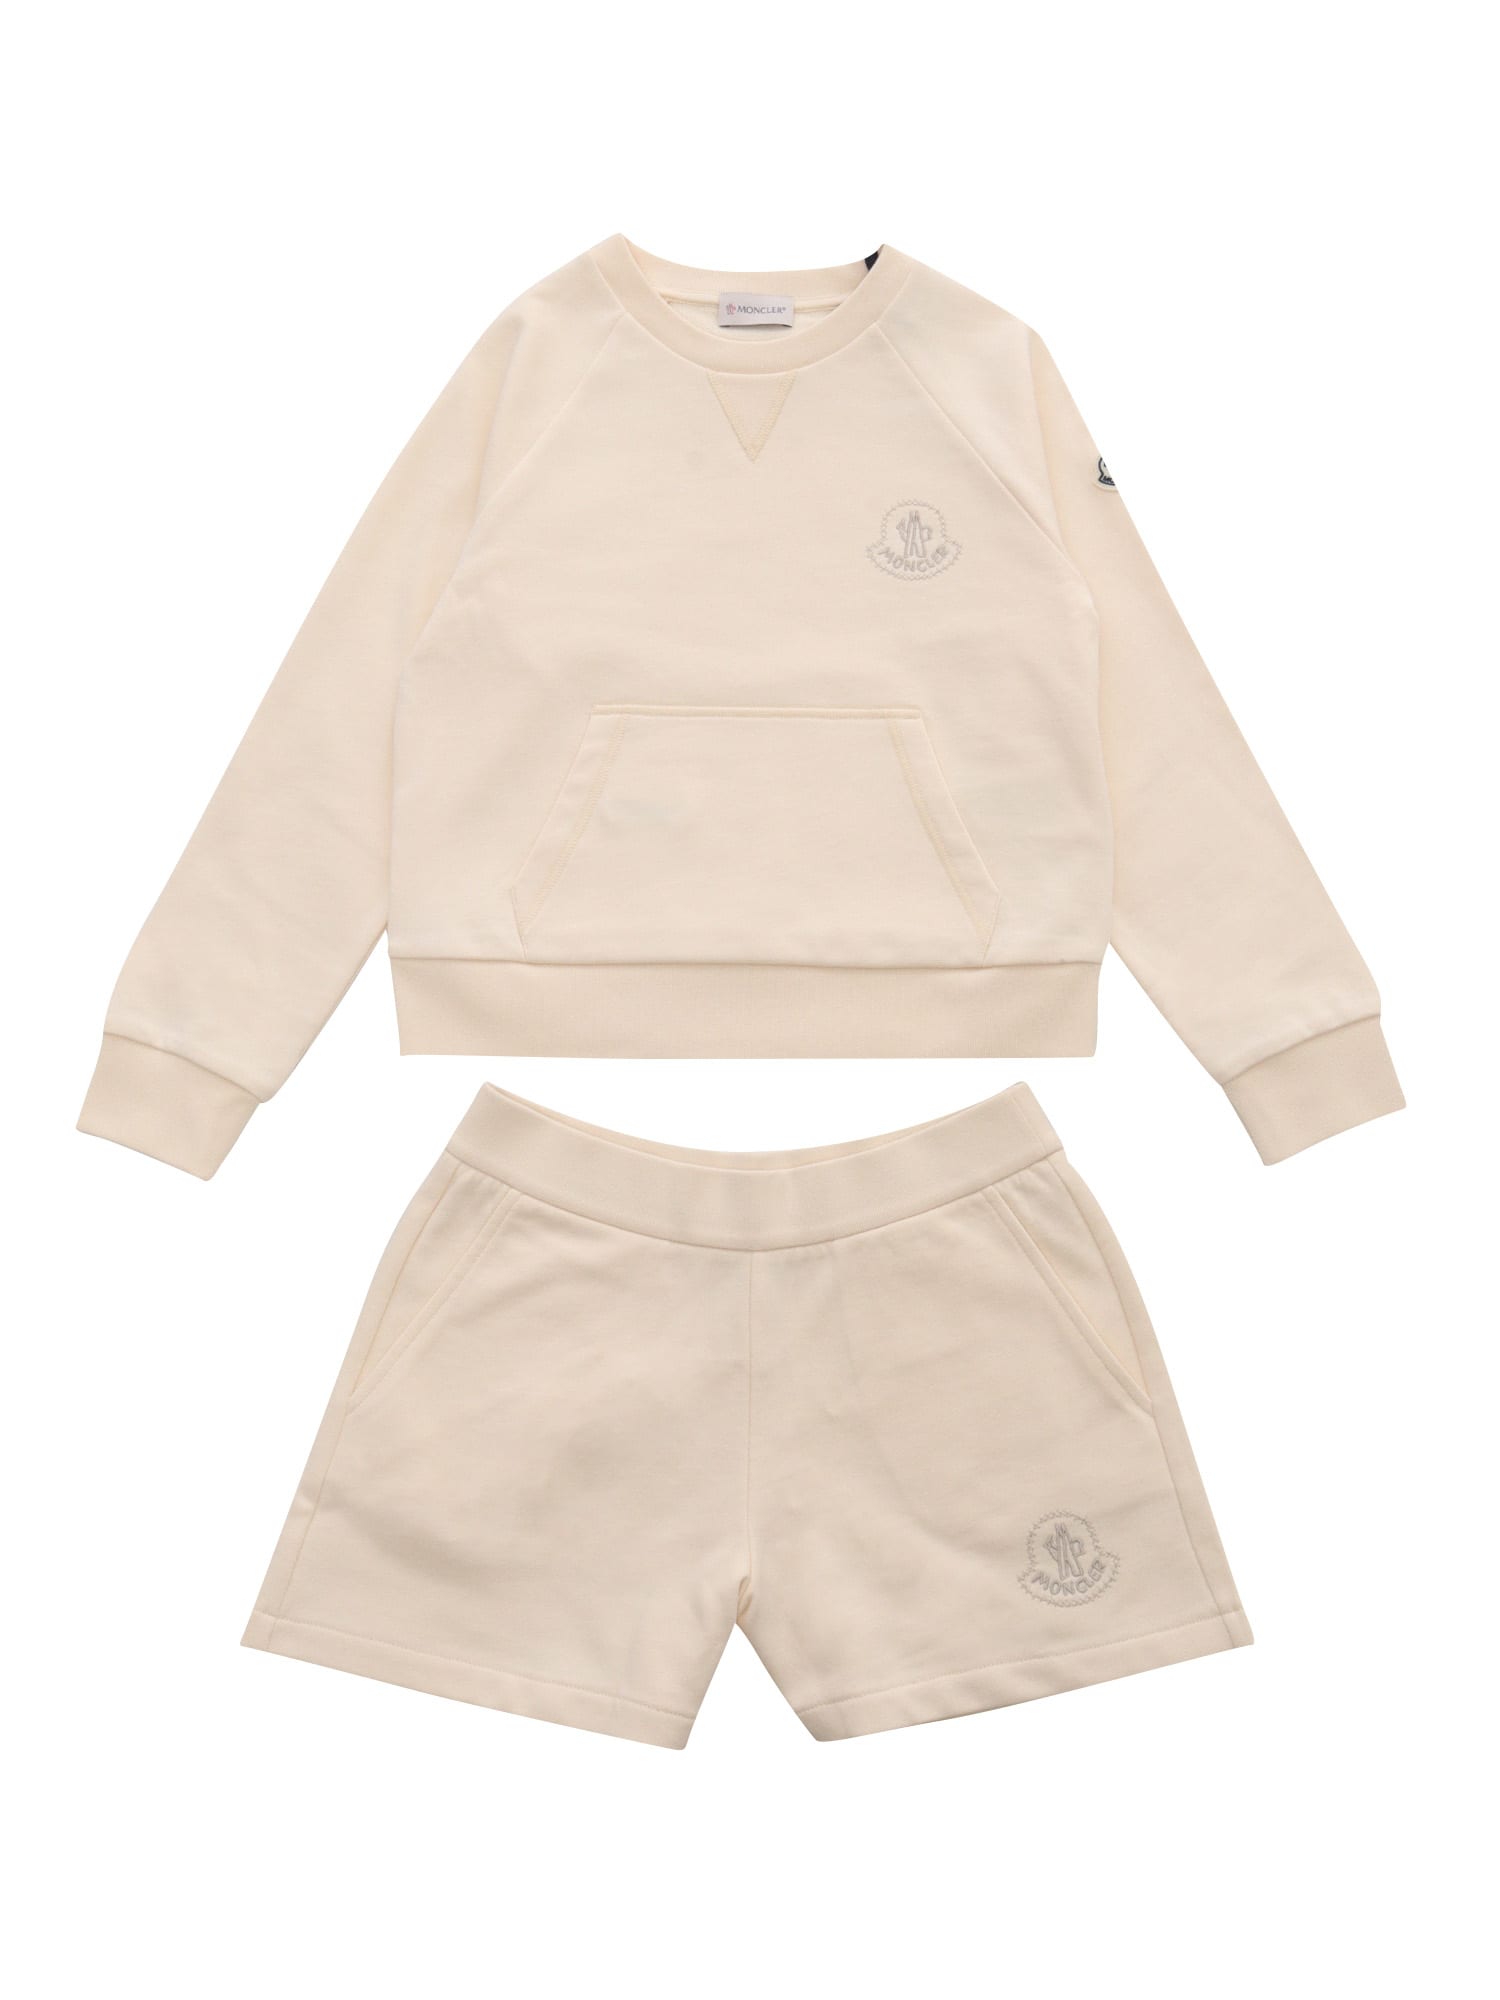 Moncler Kids' 2 Pieces Sportive Suit In Cream